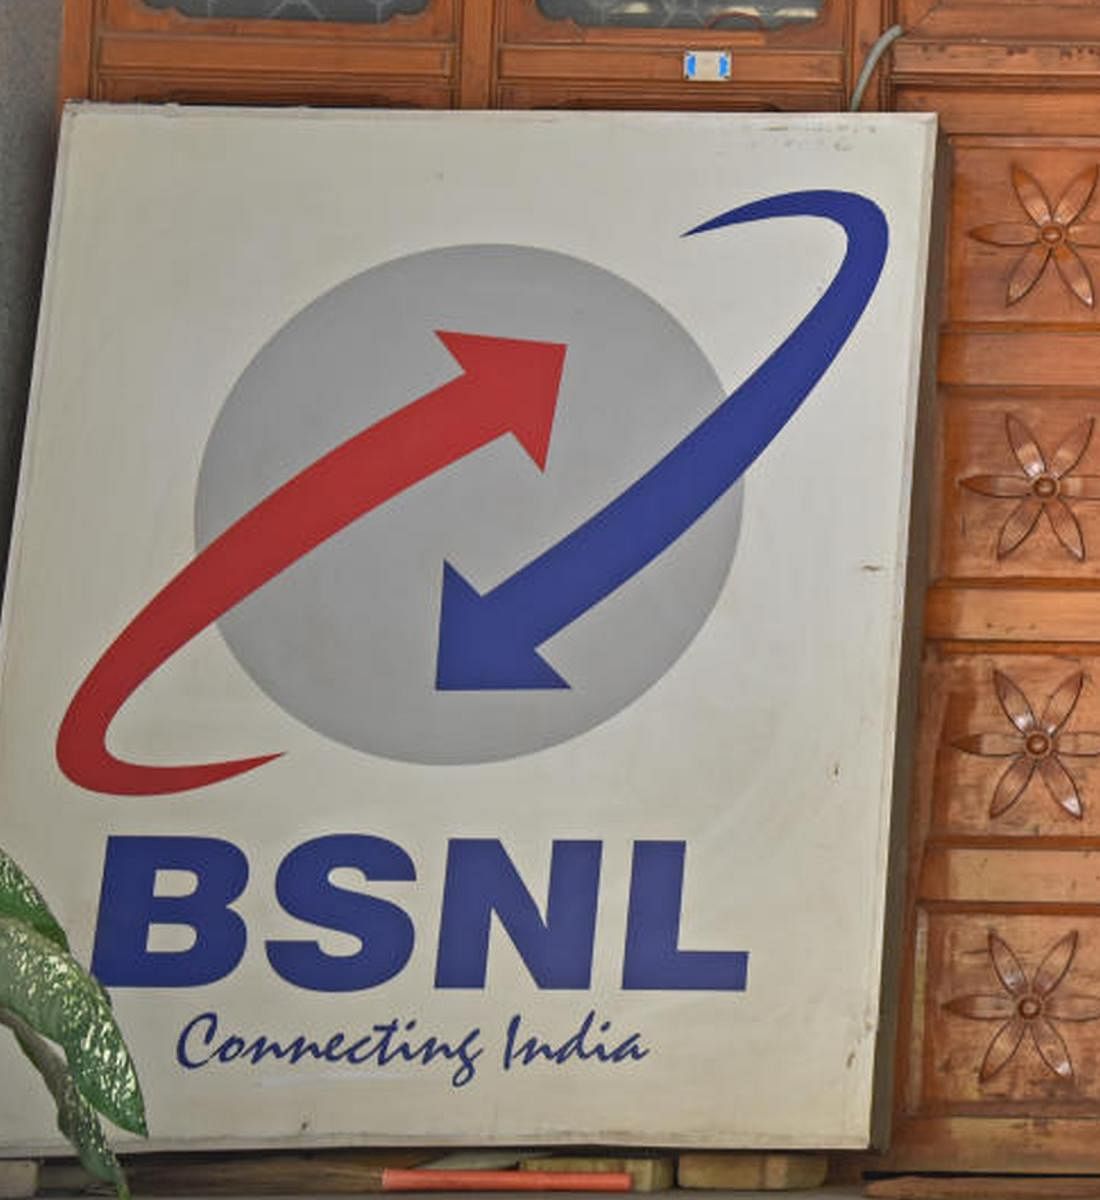 BSNL on its own is in negotiation with Central Board of Secondary Education (CBSE) and others for sale of some land. (File Image)